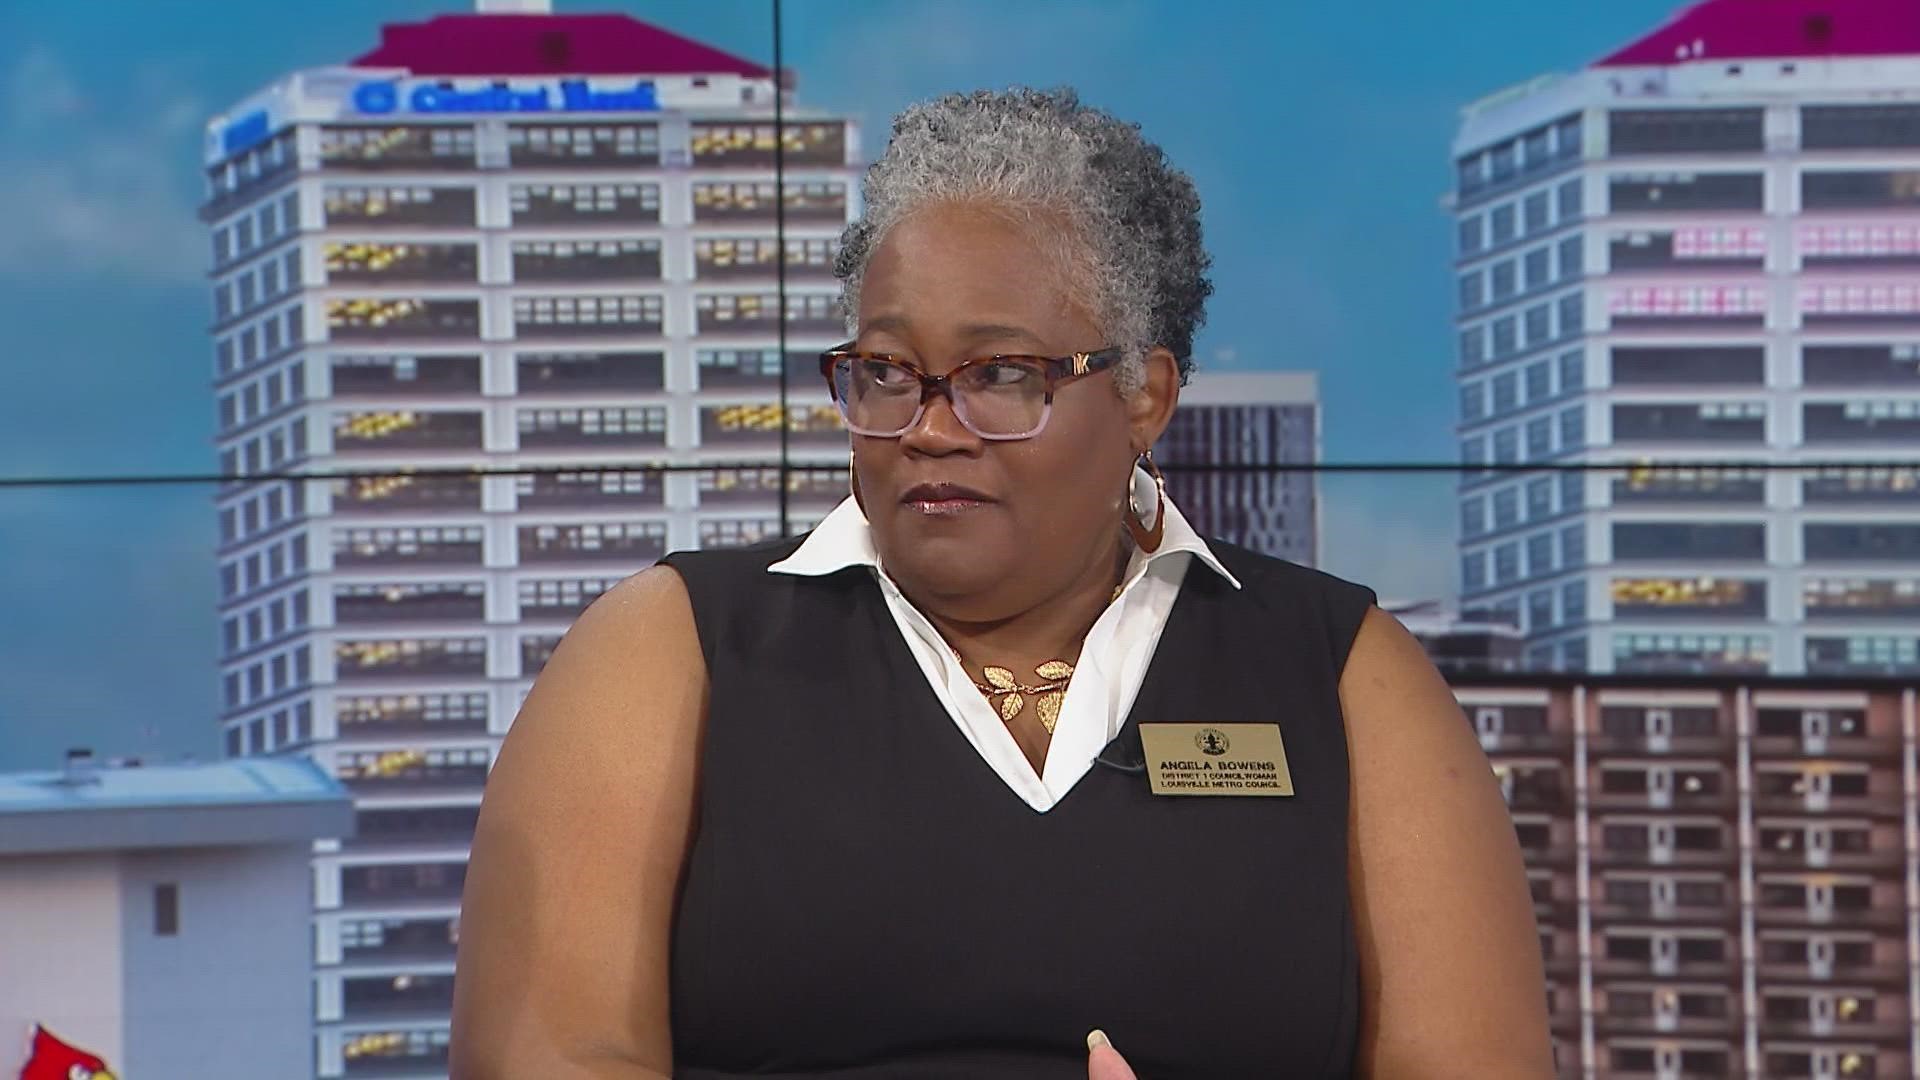 District 1 Councilwoman Angela Bowens spoke with WHAS11 as her time on the council is coming to an end soon.